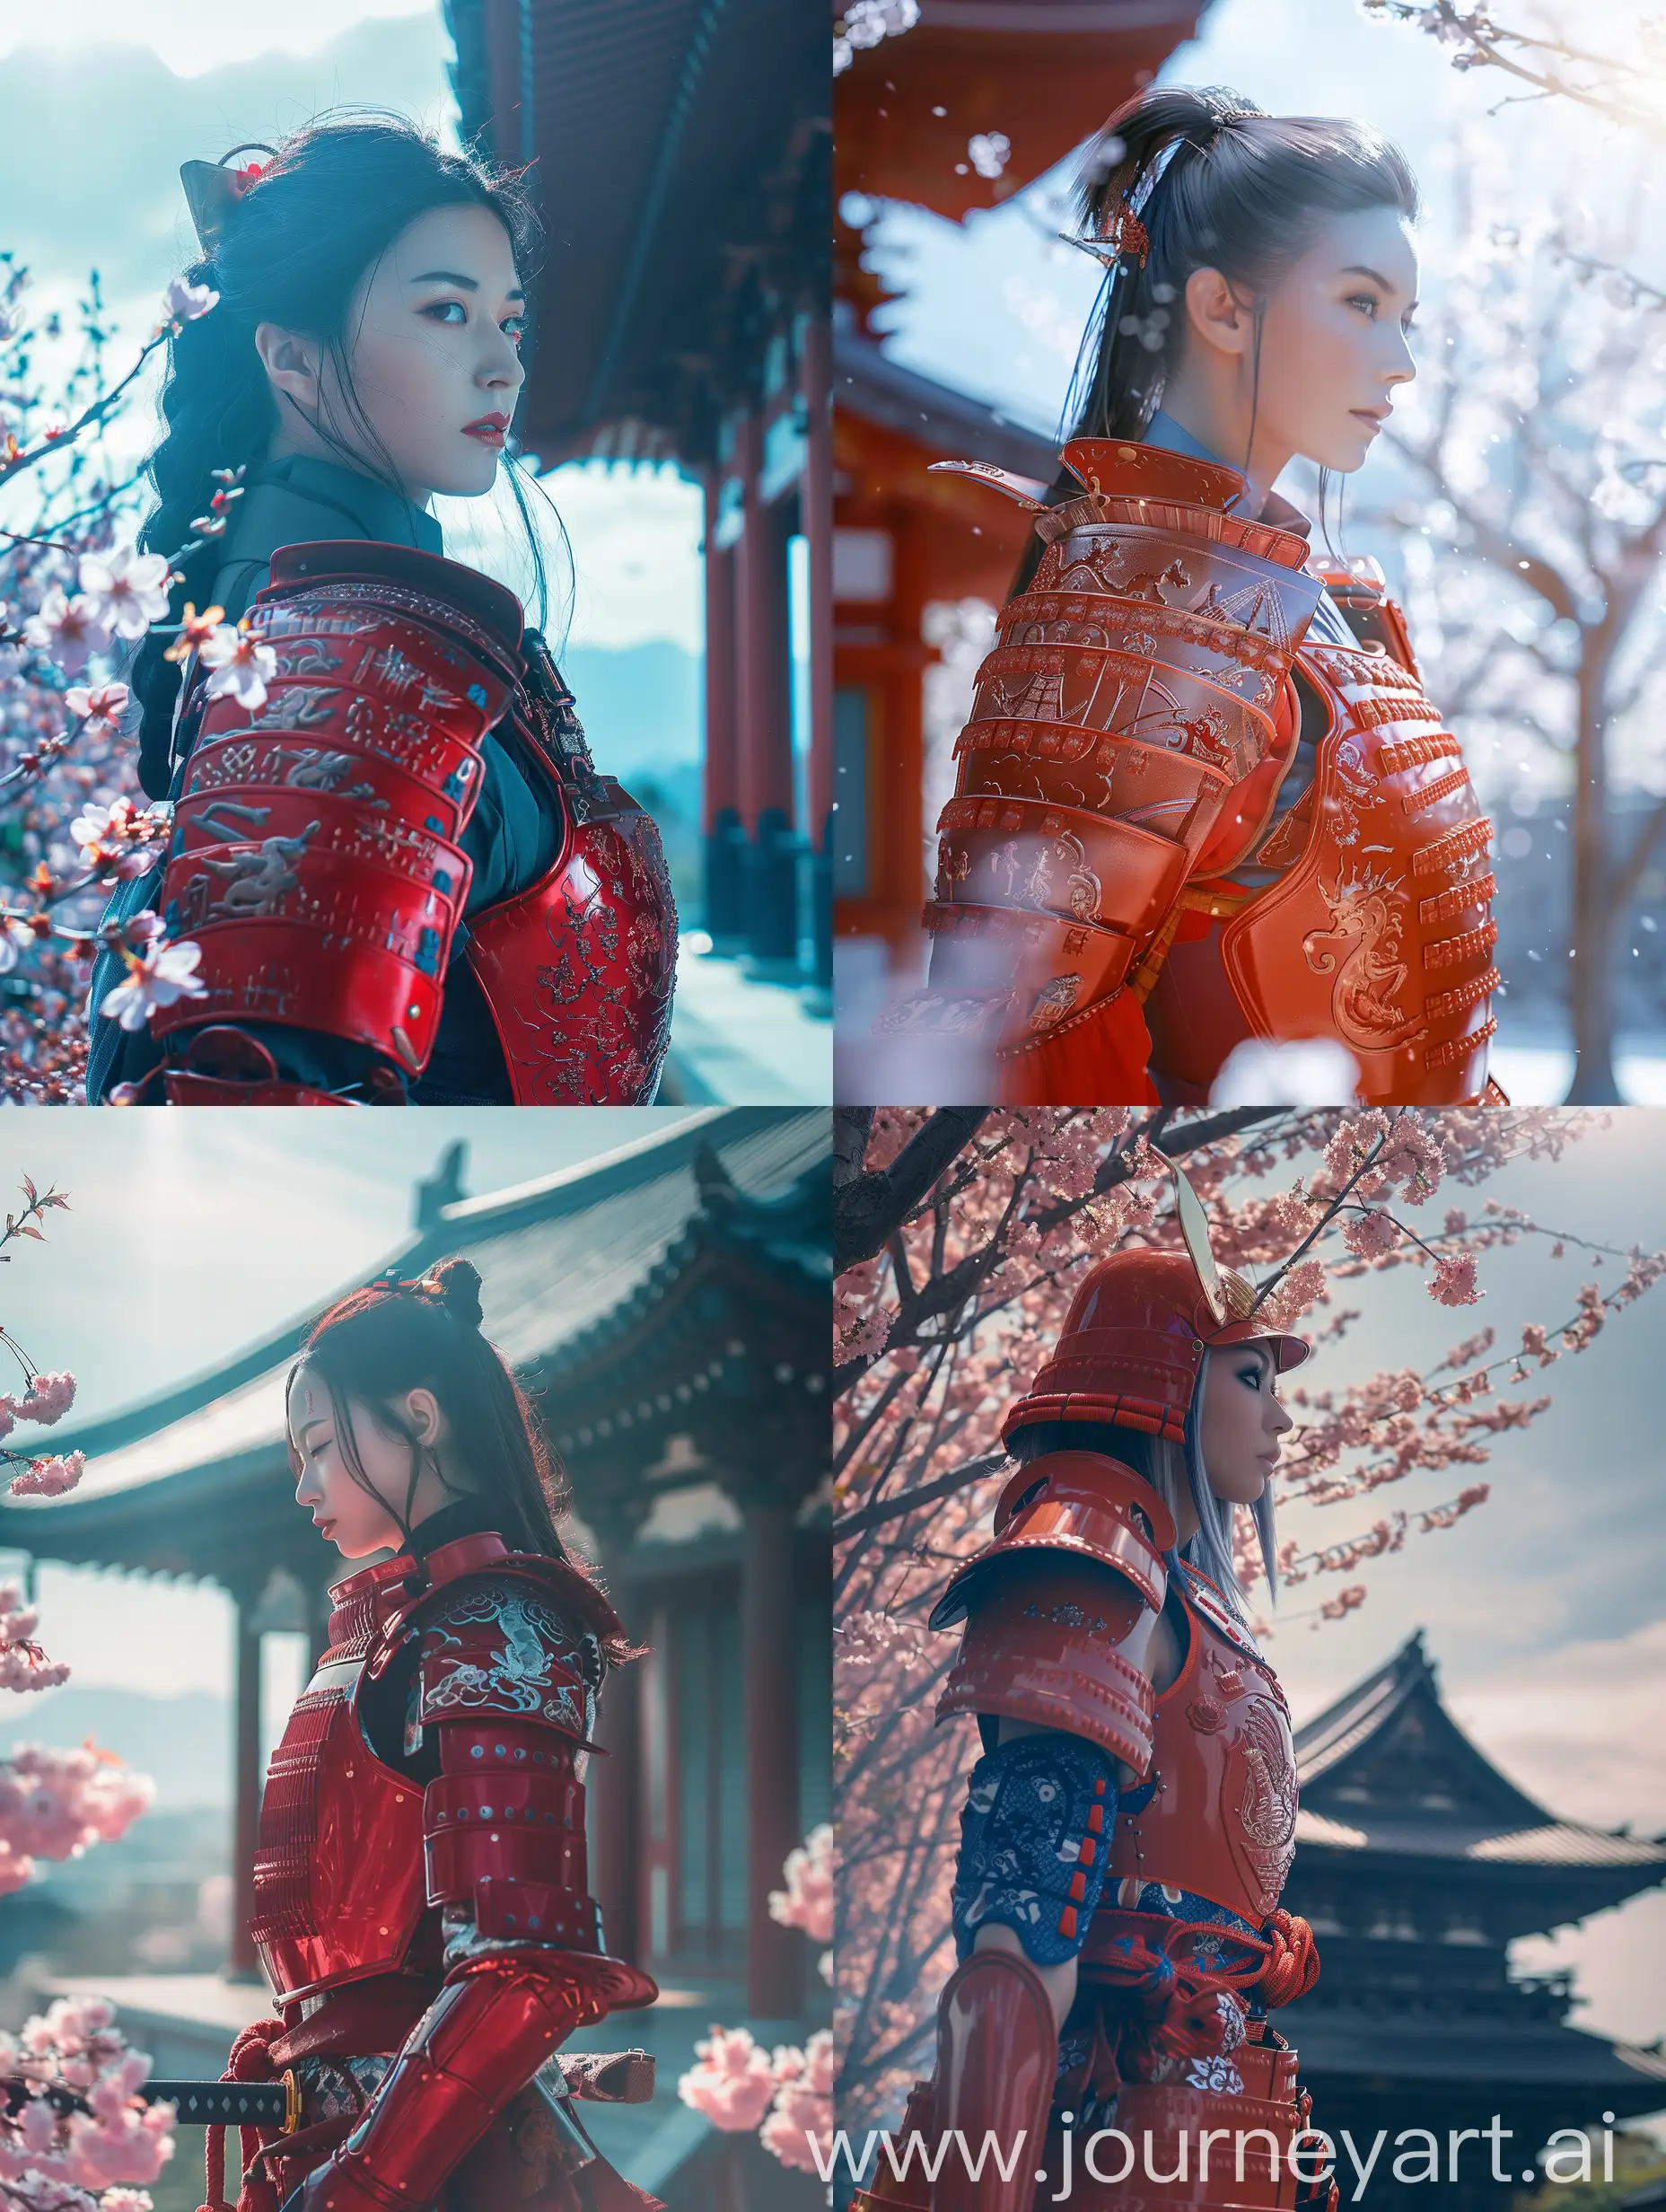 Character: A stunning female samurai warrior in bright Red armor that shows elegance and strength.
Environment: Studio cherry blossom trees
Background: A Side view of a simple but beautiful Japanese temple.
Style: A rich fashion shoot blending the classic samurai look with a modern twist.
Photography Type: A cinematic shoot that brings out the character of the Red-armored samurai.
Theme: A shoot that combines old and new, centered on the black-armored samurai.
Visual Filters: Enhanced with a Fashion Film Look-Up Table (LUT) for a richer look.
Camera Effects: Soft blur, haze, and natural light to bring out the blue of the armor.
Time: Set in a quiet Cloudy sky for a peaceful atmosphere.
Resolution: High resolution to capture every detail.
Key Element: The main focus is the bright light Red armor, detailed to catch the light and stand out against the temple.
Details: The armor is detailed with traditional Japanese designs and scenes from samurai stories. It shines in the Sun light, showing off the skill of the people who made it. The shape of the armor is highlighted, creating a beautiful image that brings out the spirit of the samurai.